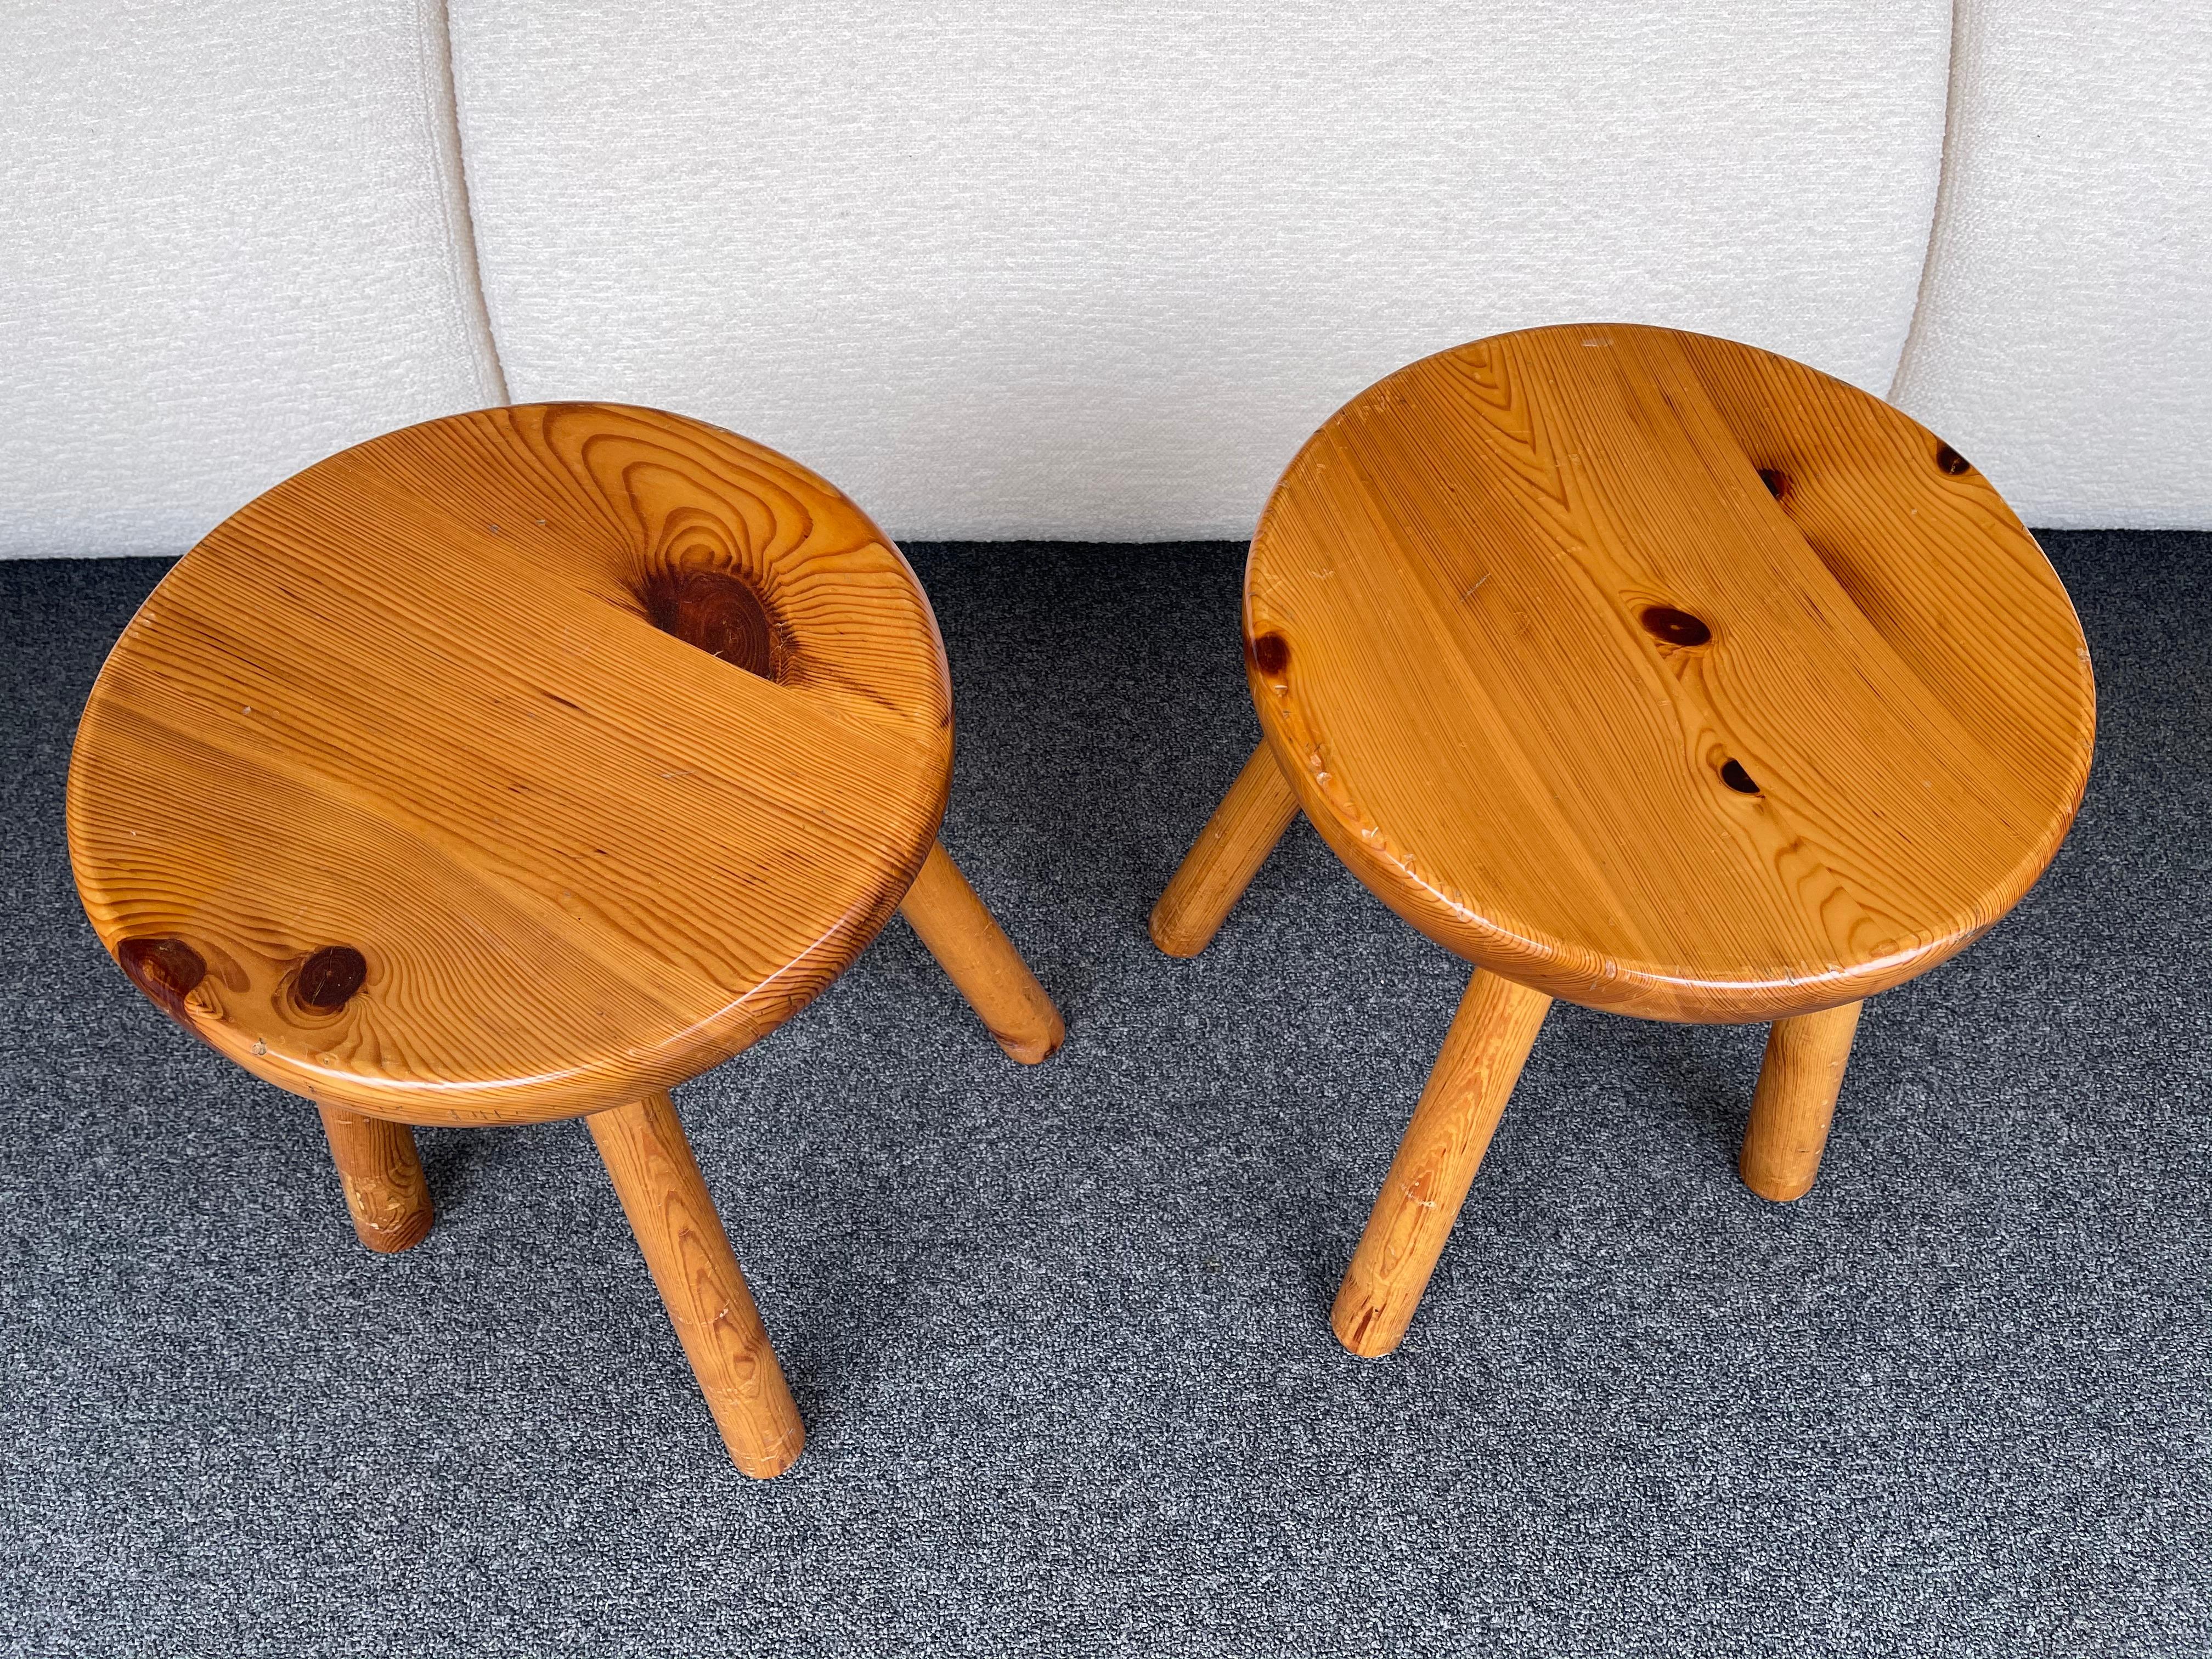 Carved solid pinewood pair of stools design style Les Arcs attributed to Charlotte Perriand. Famous design like Pierre Jeanneret, Chandigarh, Le Corbusier, Jean Prouvé.